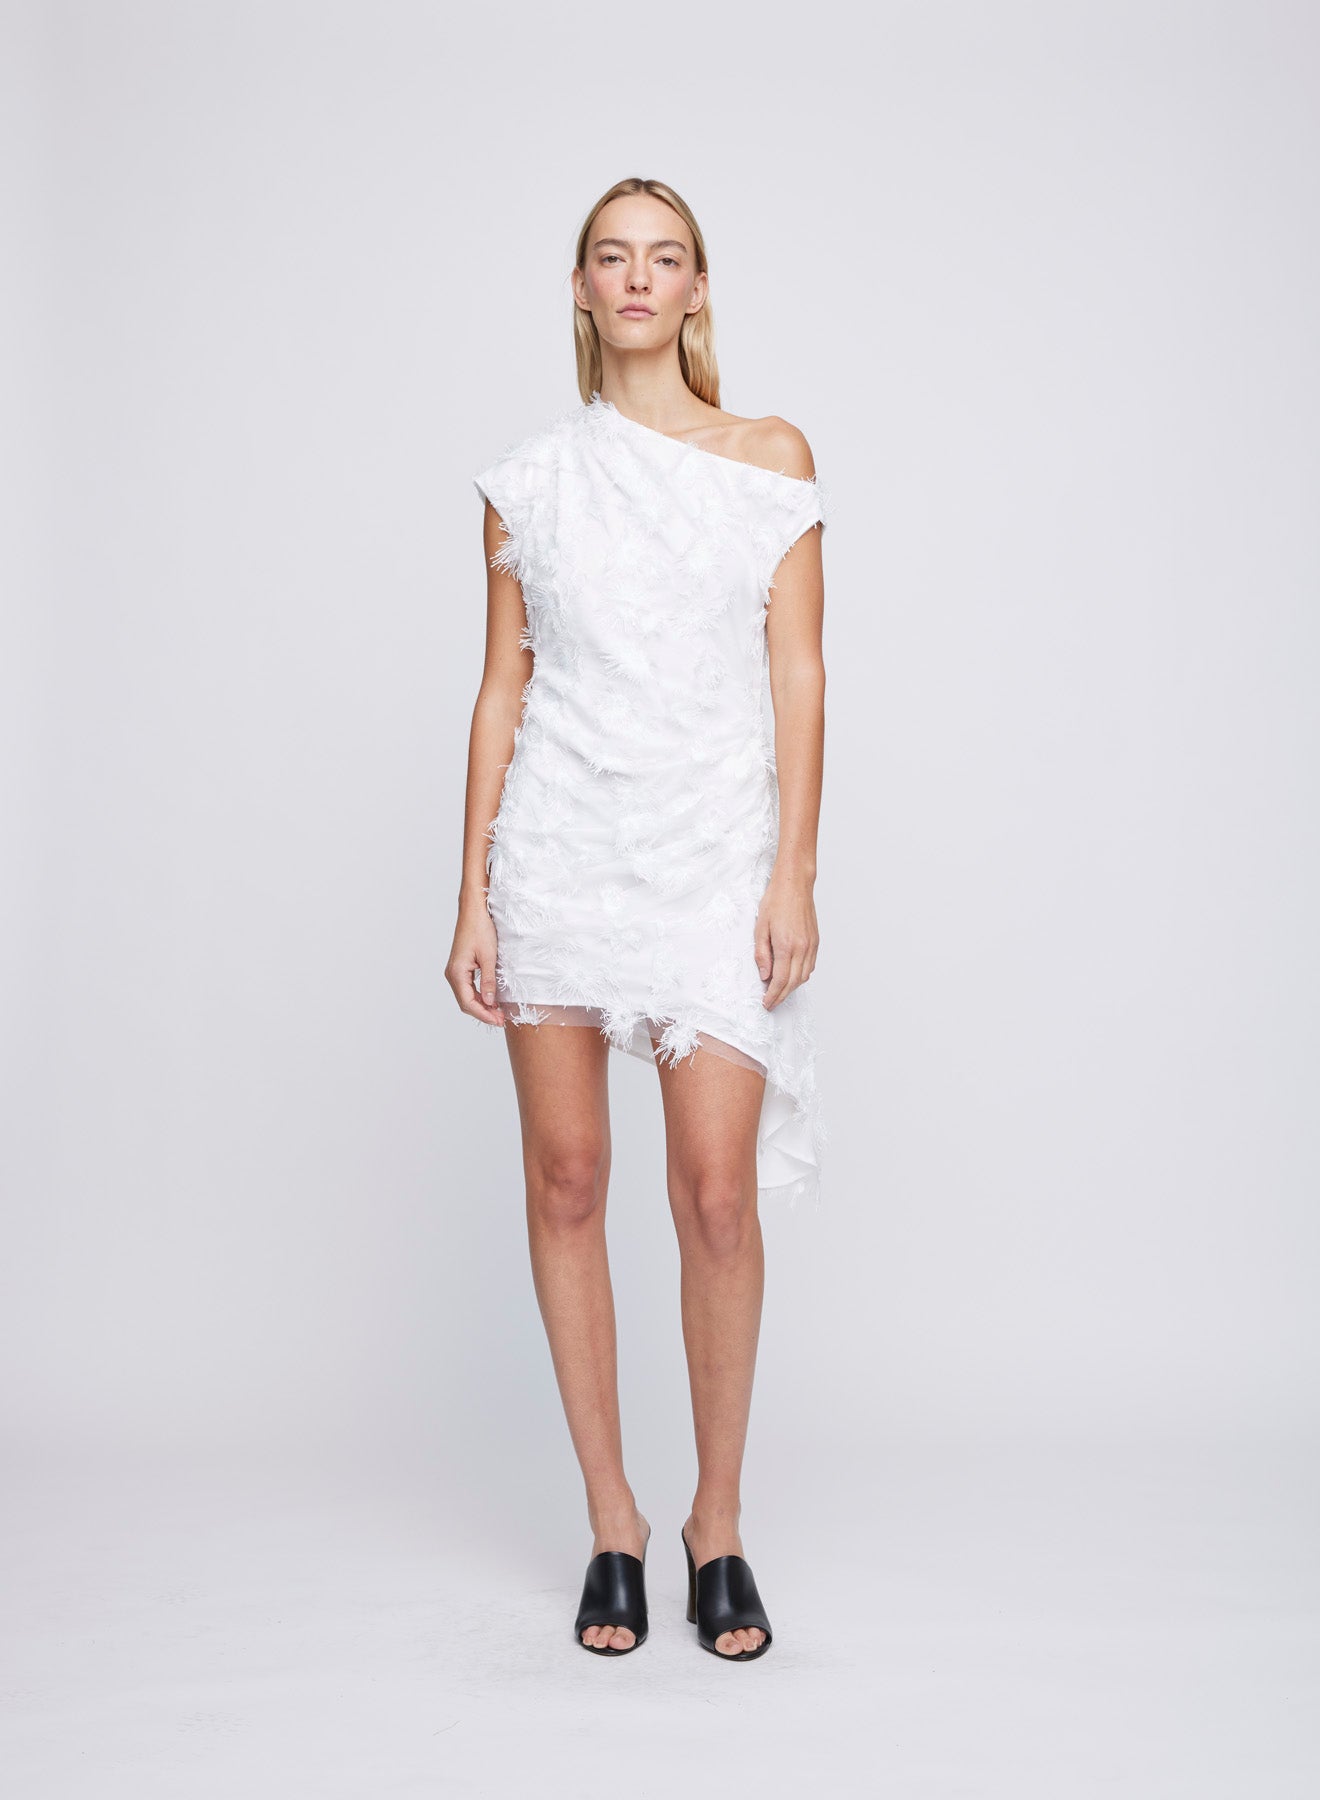 The ANNA QUAN Flora Dress in Dandelion is an asymmetrical off-shoulder occasion piece. Cut in a satin fabrication for a lustrous and flattering finish with waist gathers.